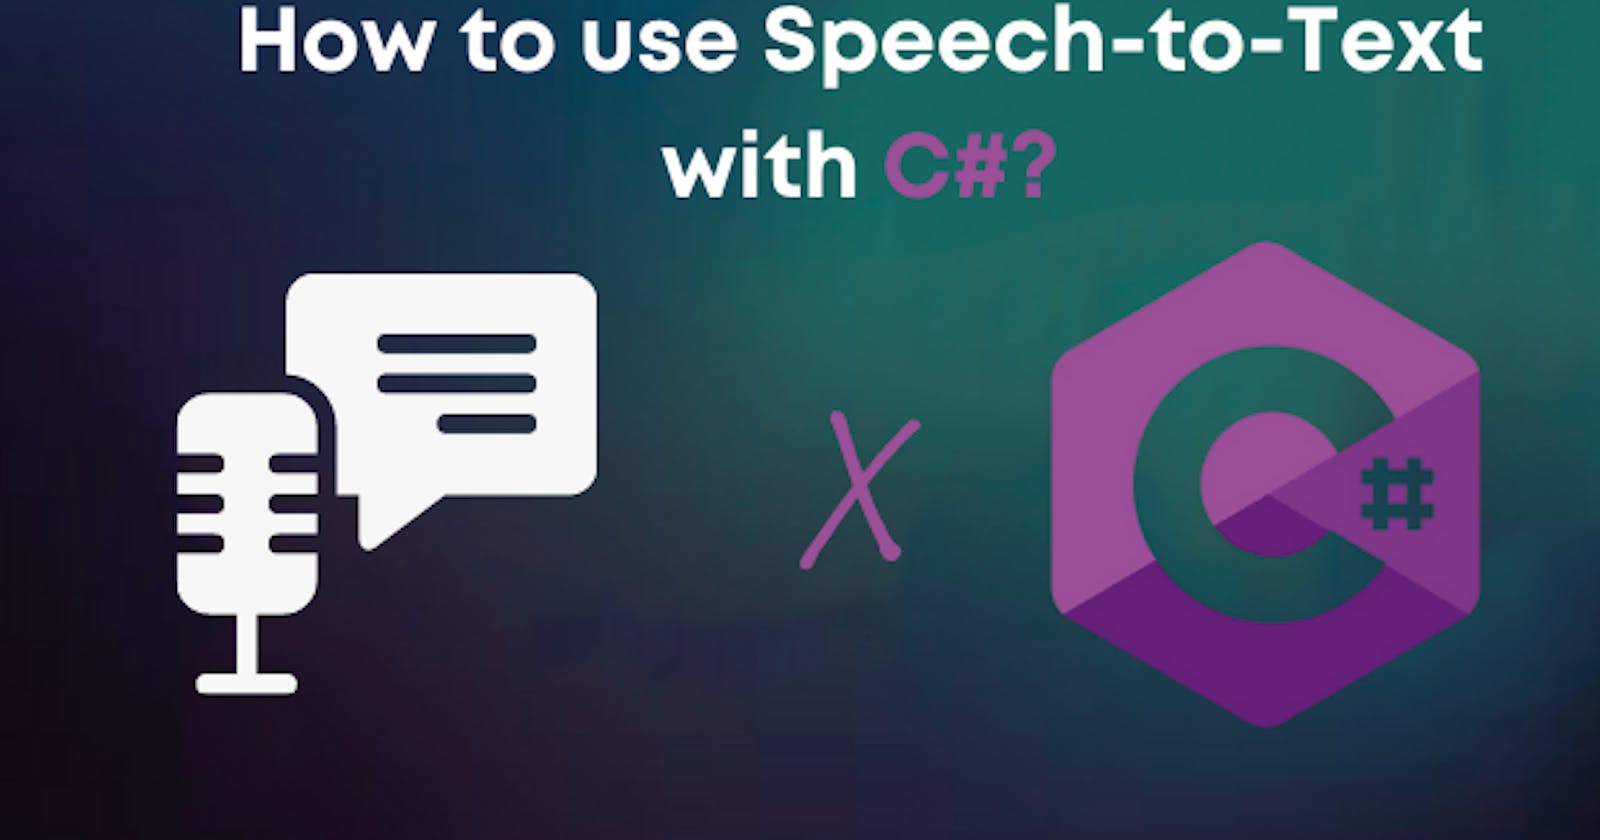 How to use Speech-to-Text with C#?